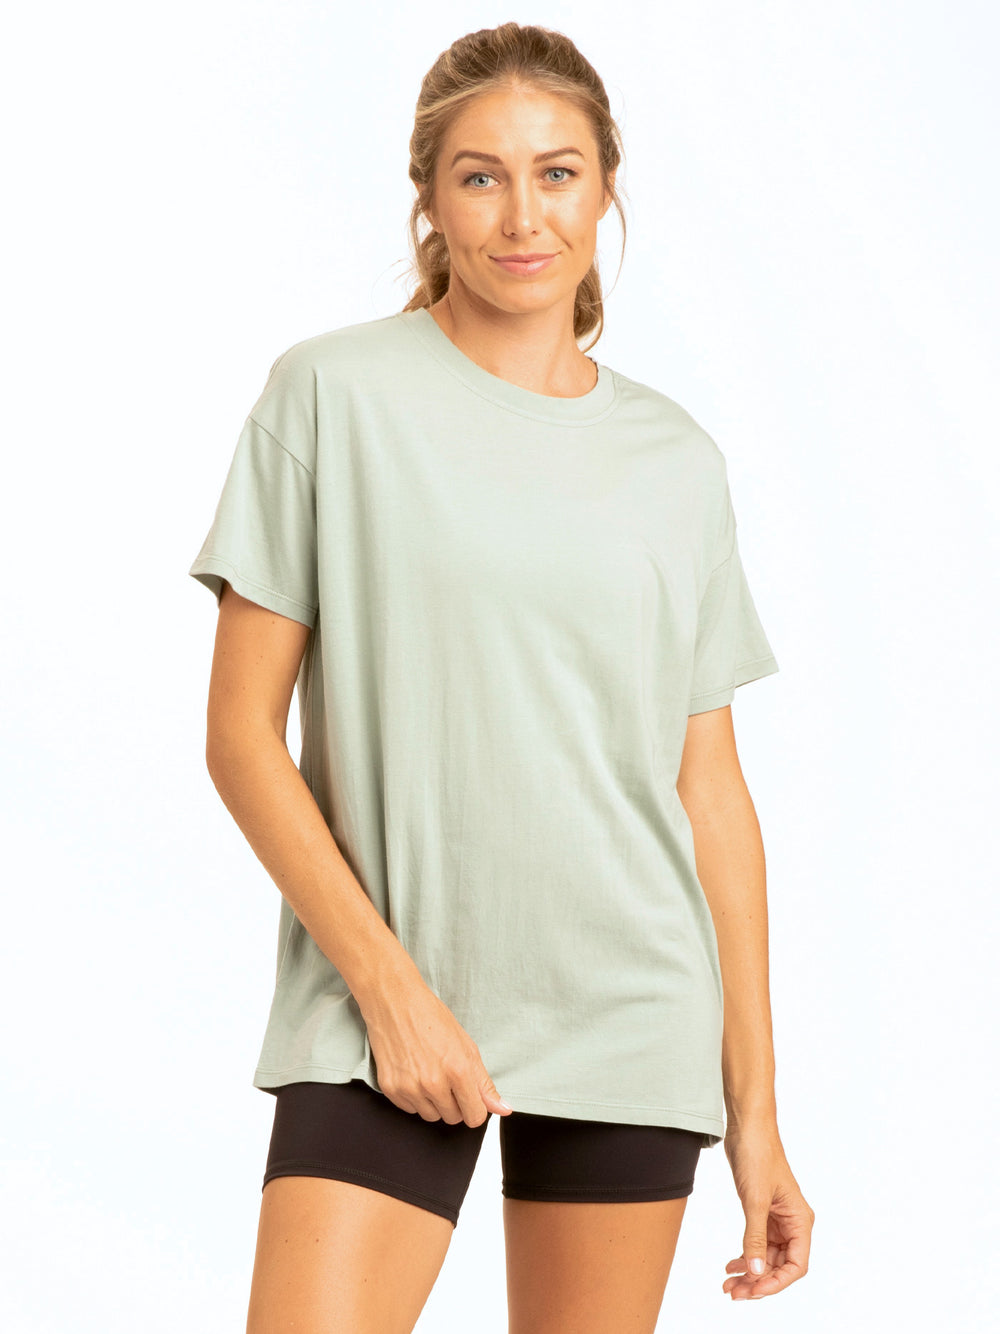 Threads 4 Thought t-shirt, Andie comfort jersey boyfriend (2 colors)